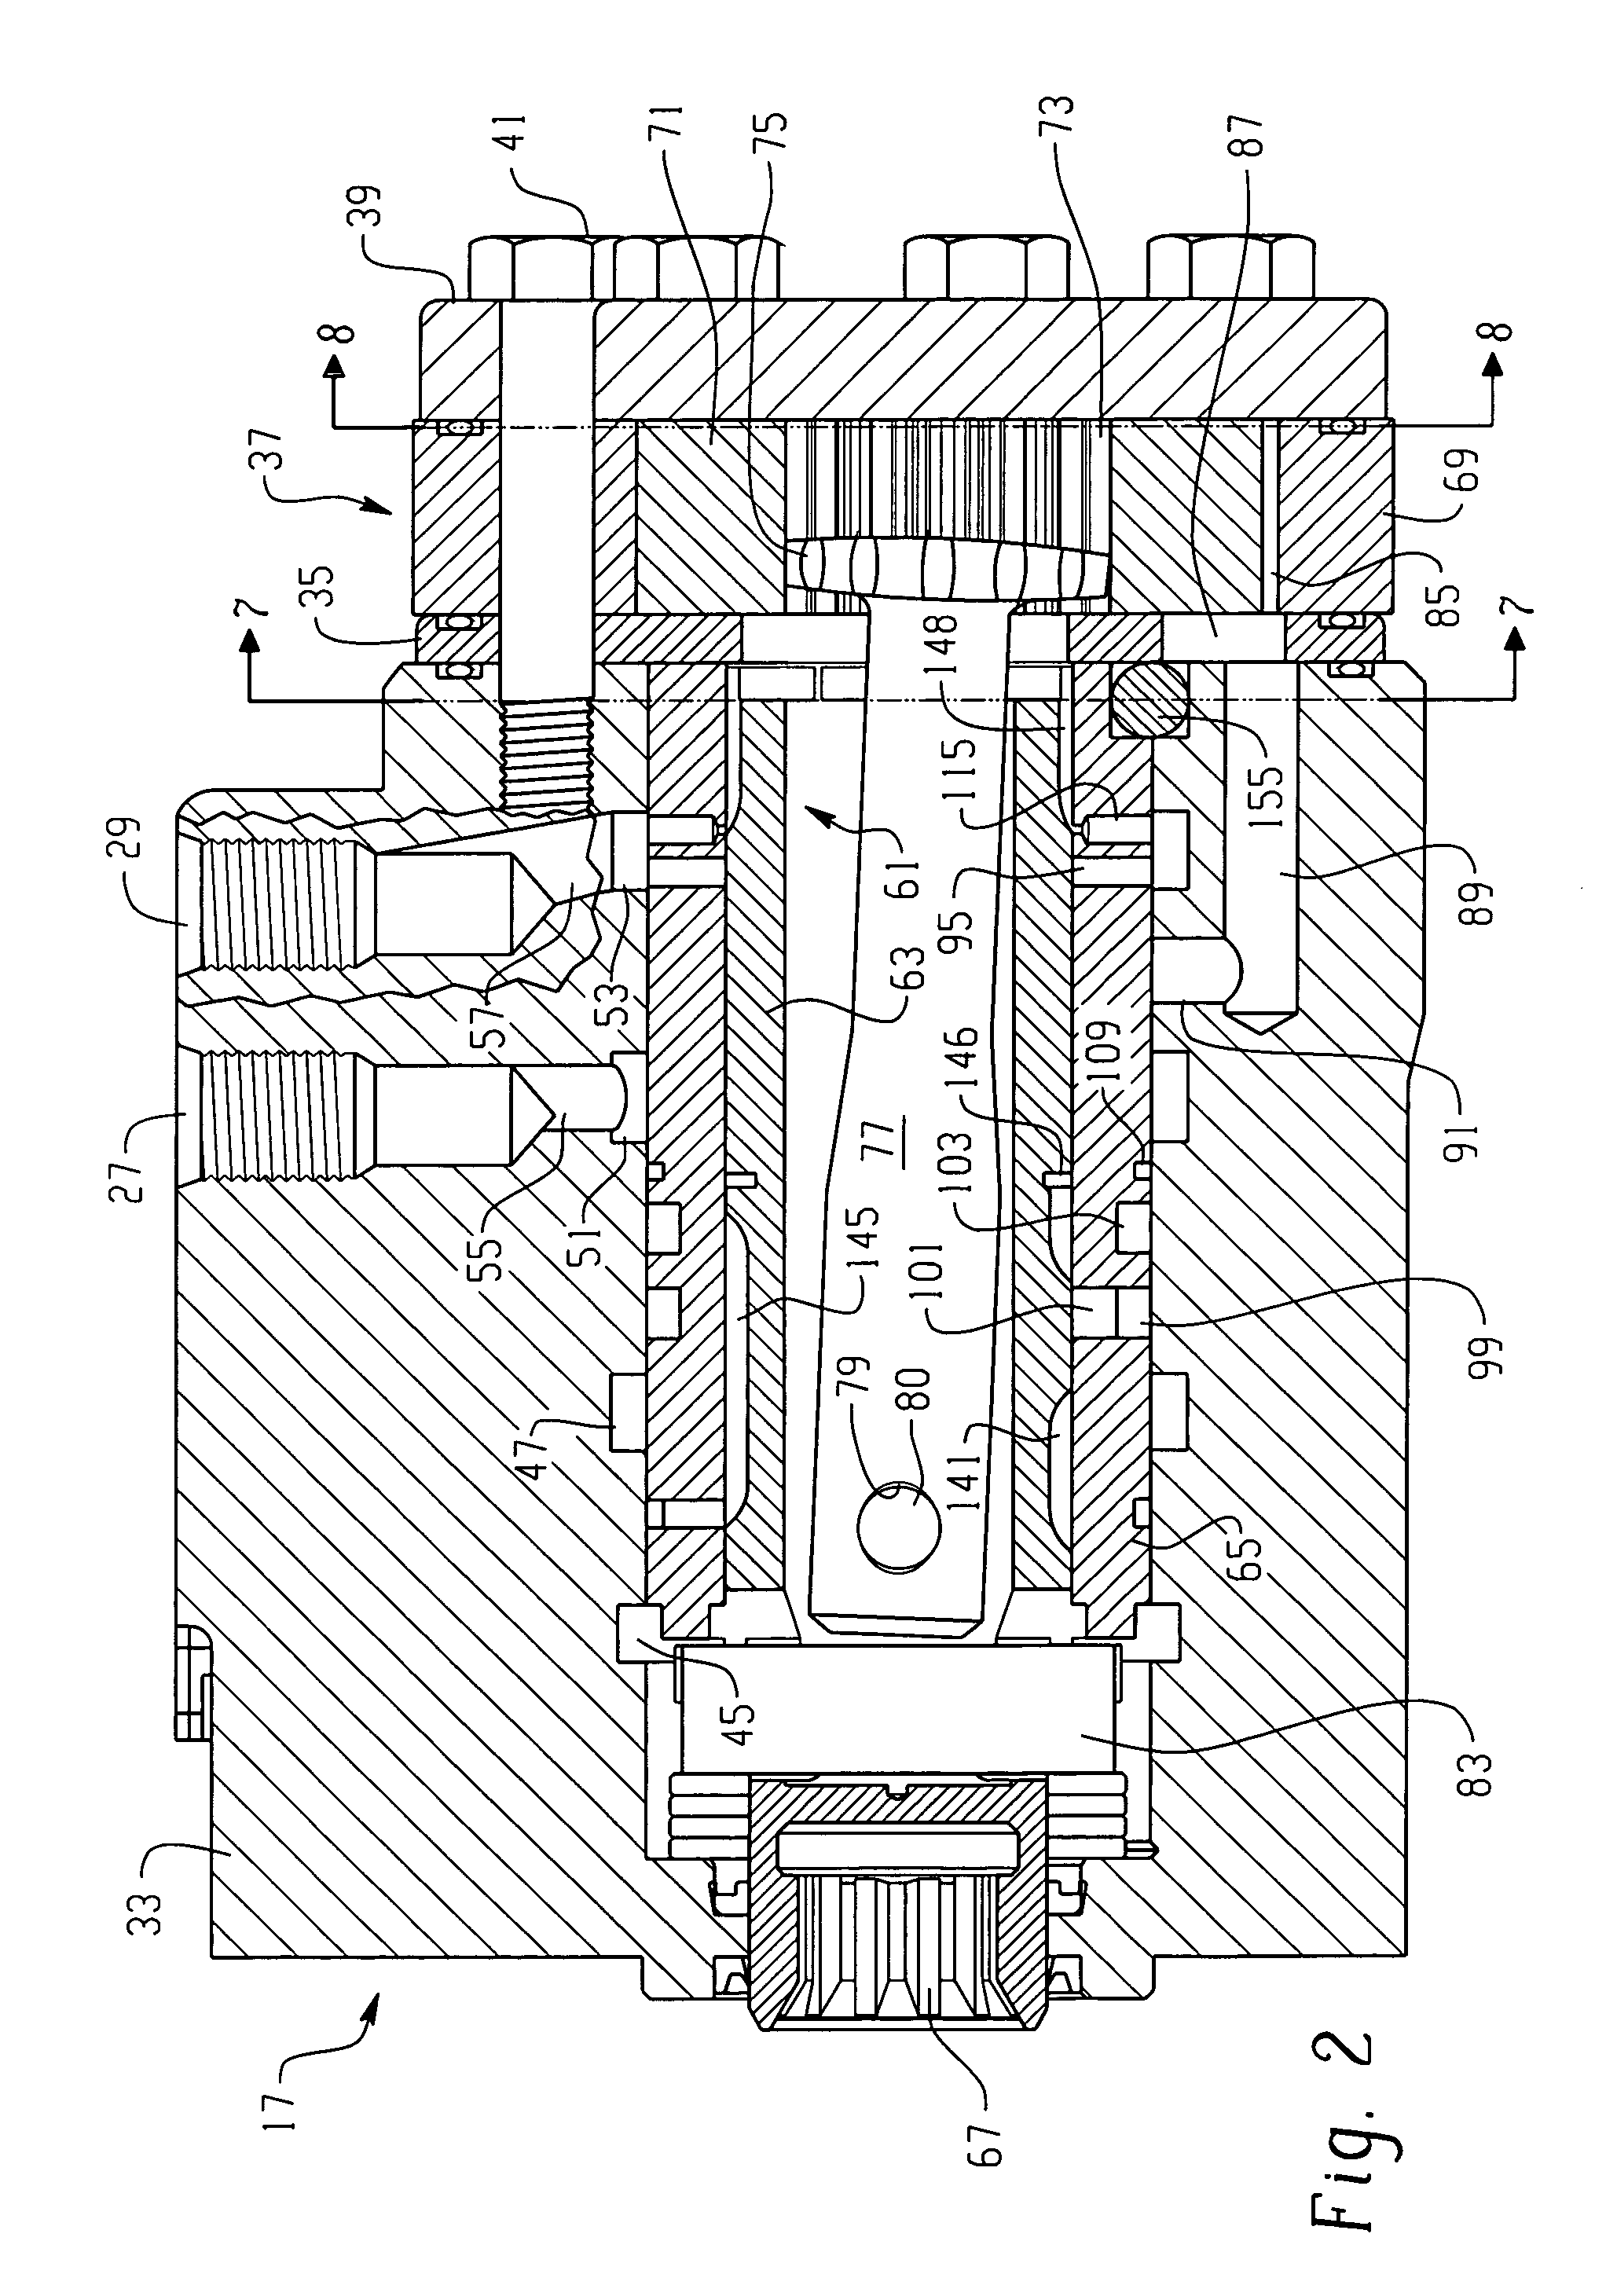 Steer valve with hydraulic vehicle position feedback